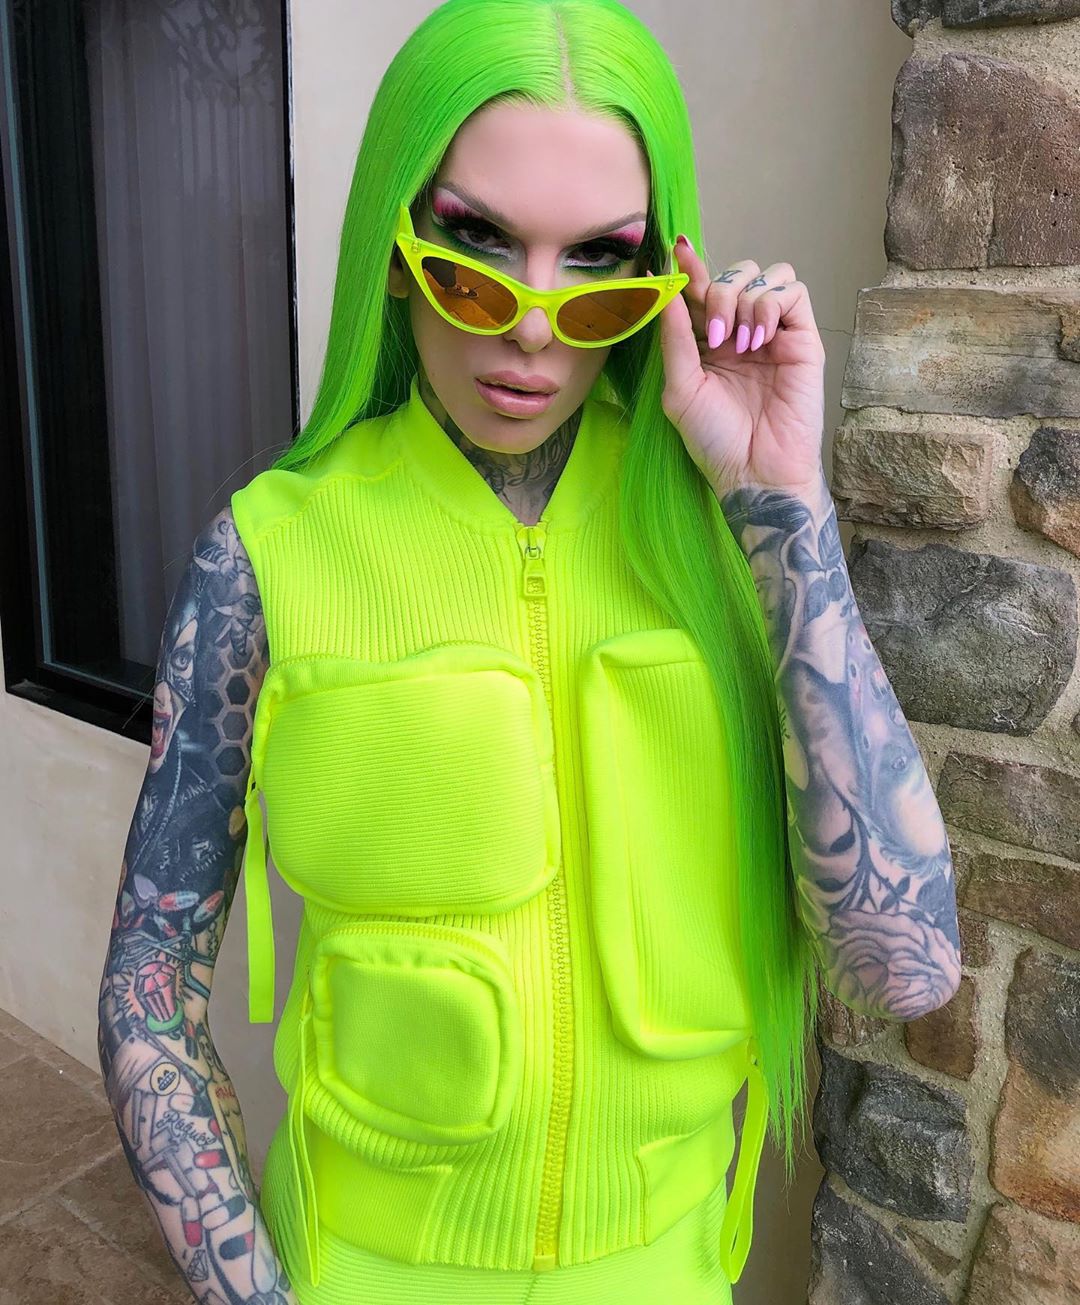 Jeffree star with his Louis Vuitton - 𝘼𝙚𝙨𝙩𝙝𝙚𝙩𝙞𝙘 𝙝𝙤𝙚  𝙗𝙞𝙩𝙘𝙝